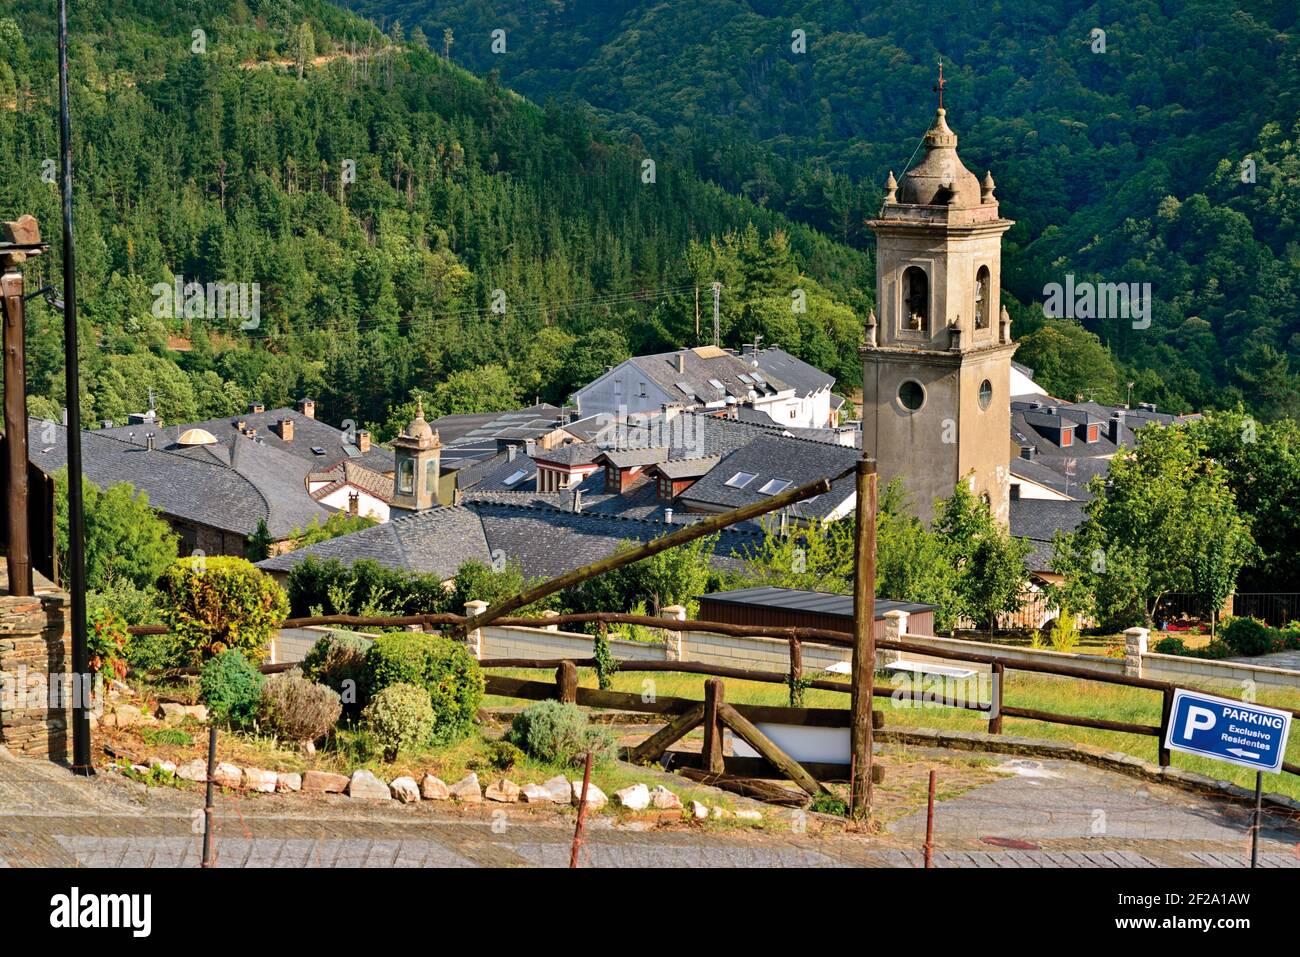 Overview of small mountain village with central church tower surrounded by green forests Stock Photo